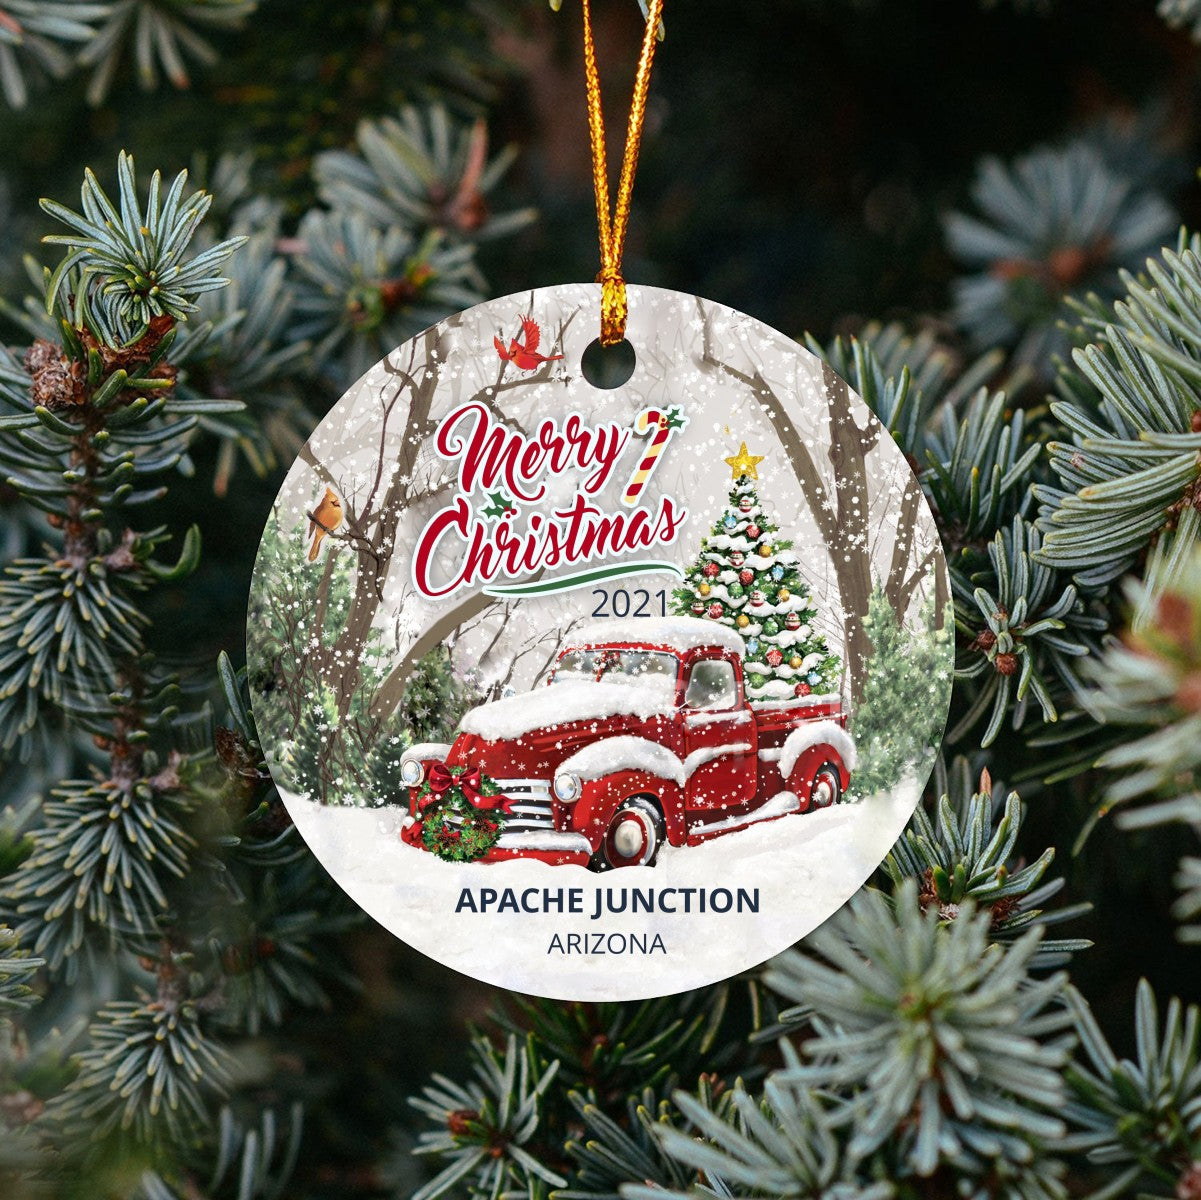 Christmas Tree Ornaments Apache Junction - Ornament Customize With Name City And State Apache Junction Arizona AZ - Red Truck Xmas Ornaments 3'' Plastic Gift For Family, Friend And Housewarming